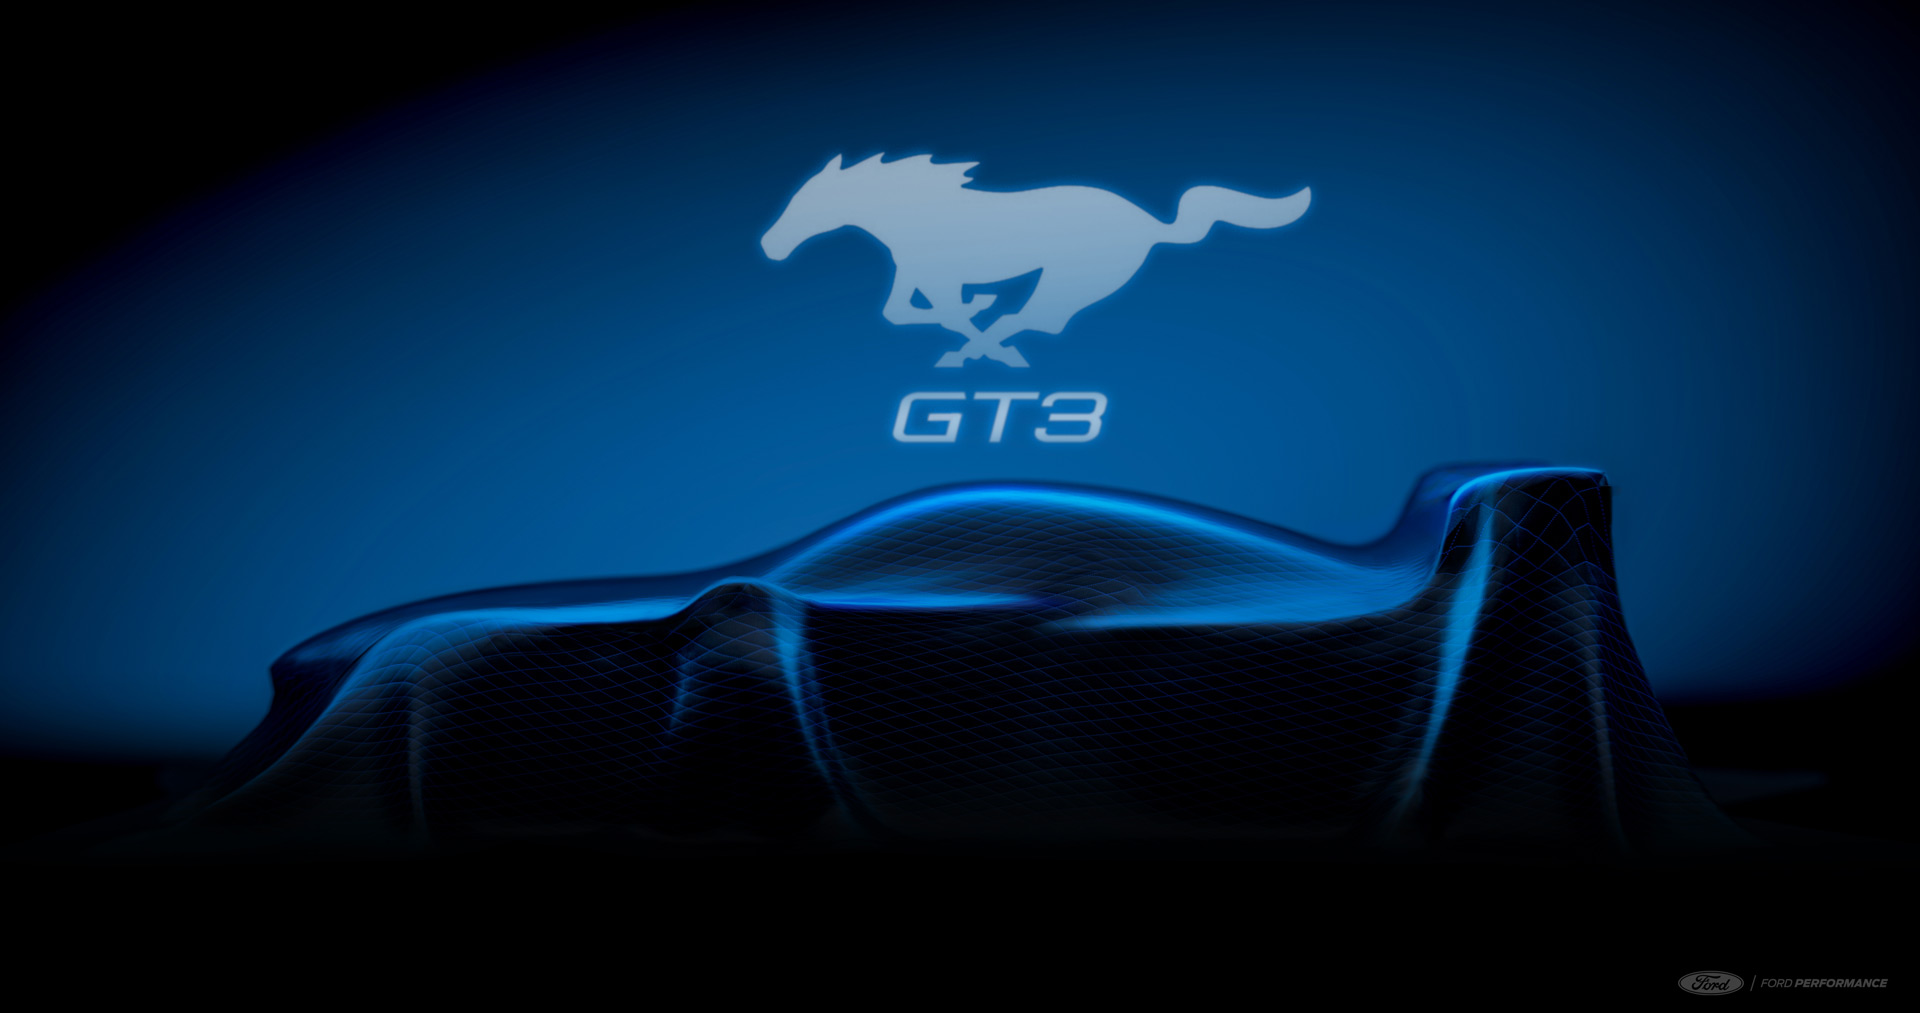 Ford Mustang GT3 coming in 2024 to tackle IMSA SportsCar Championship